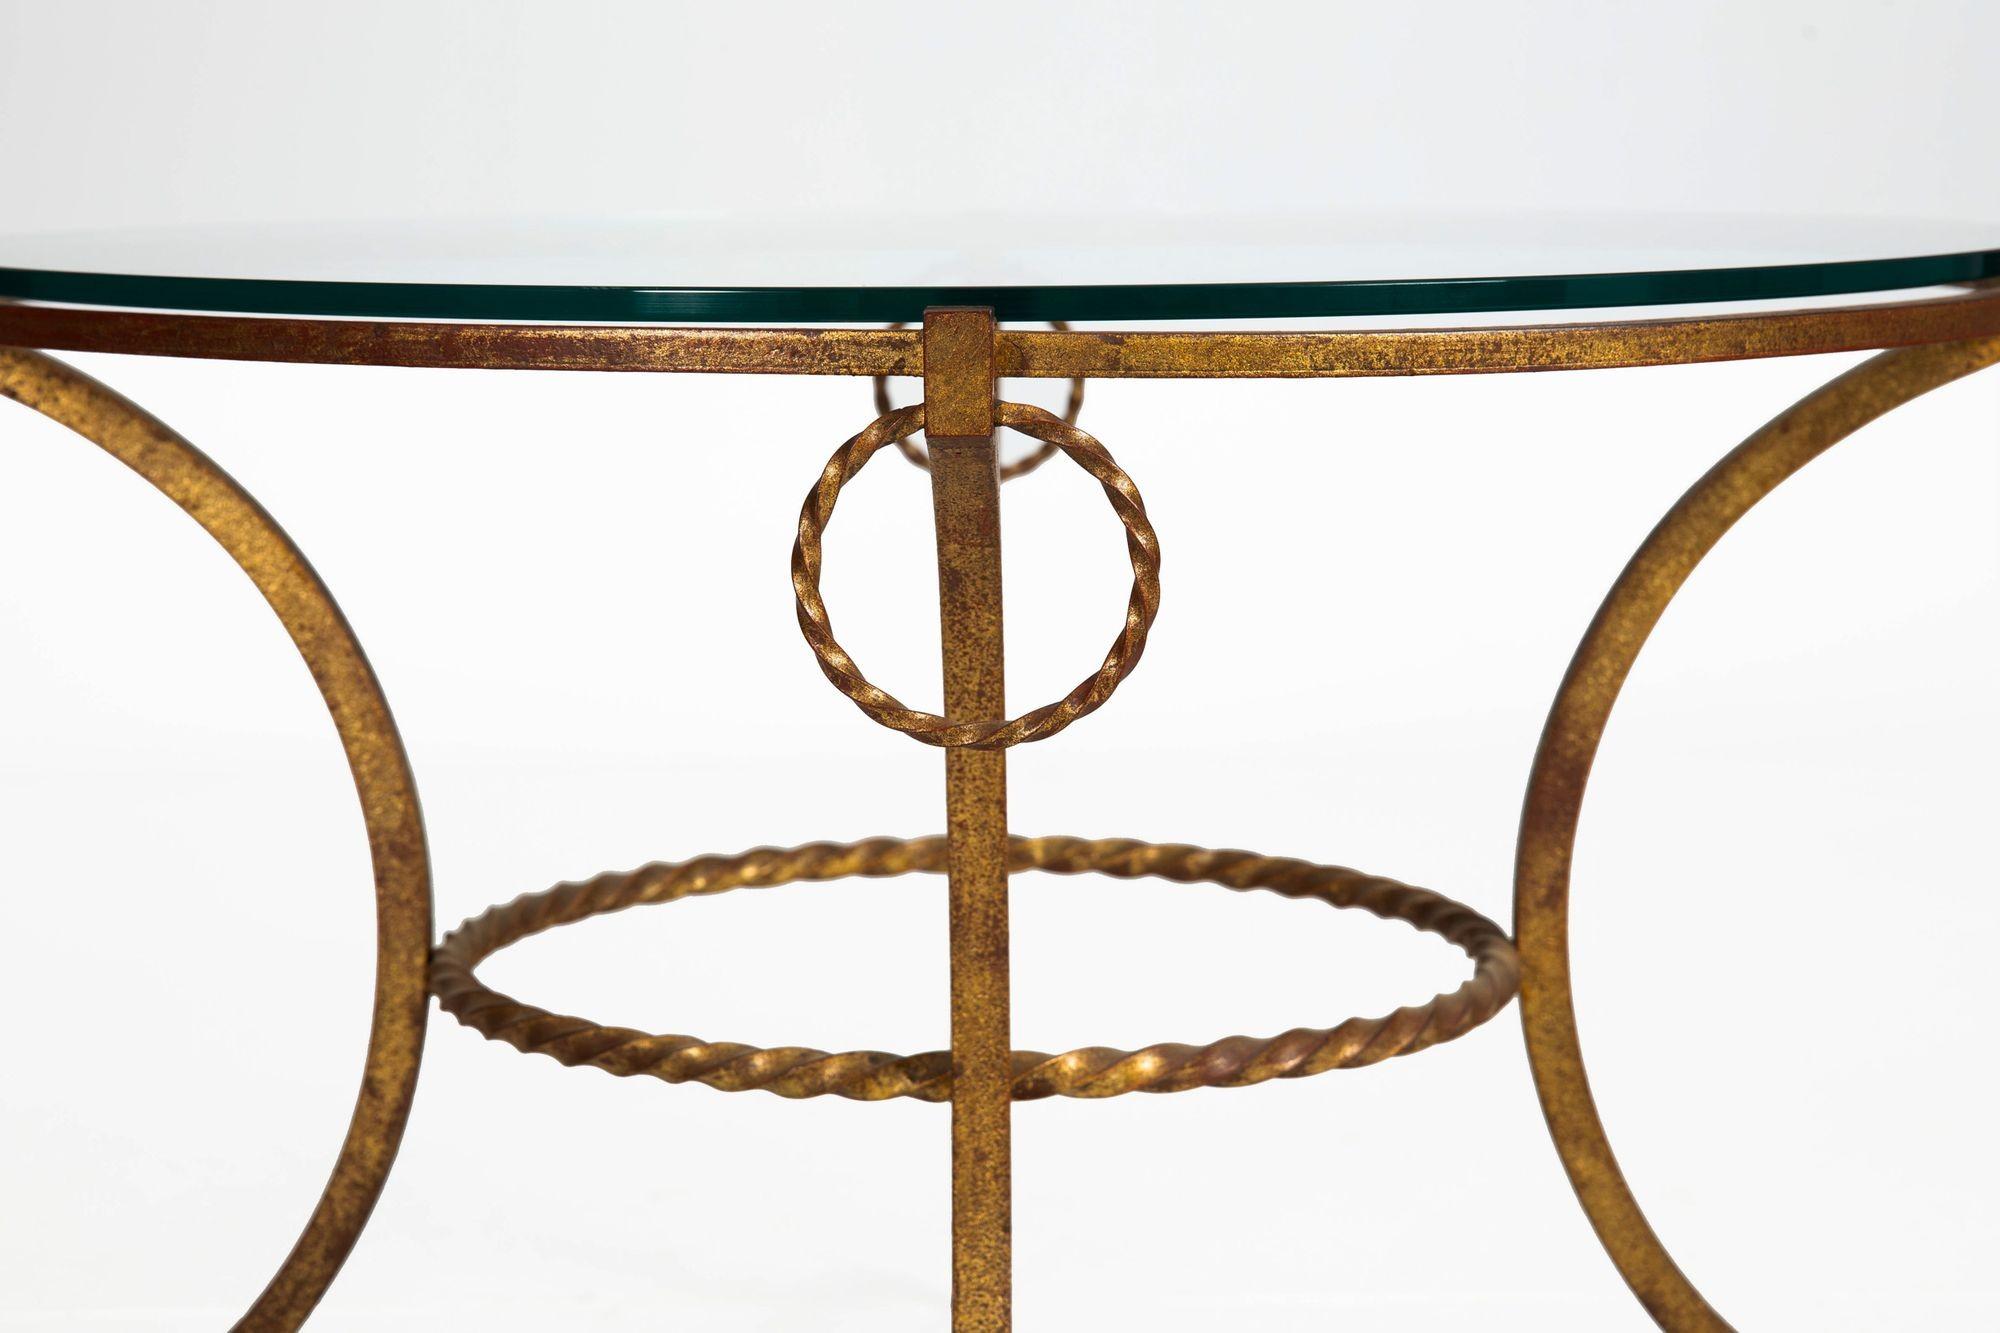 French Modernist Gilded Wrought-Iron & Glass Coffee Accent Table ca. 1950s For Sale 3